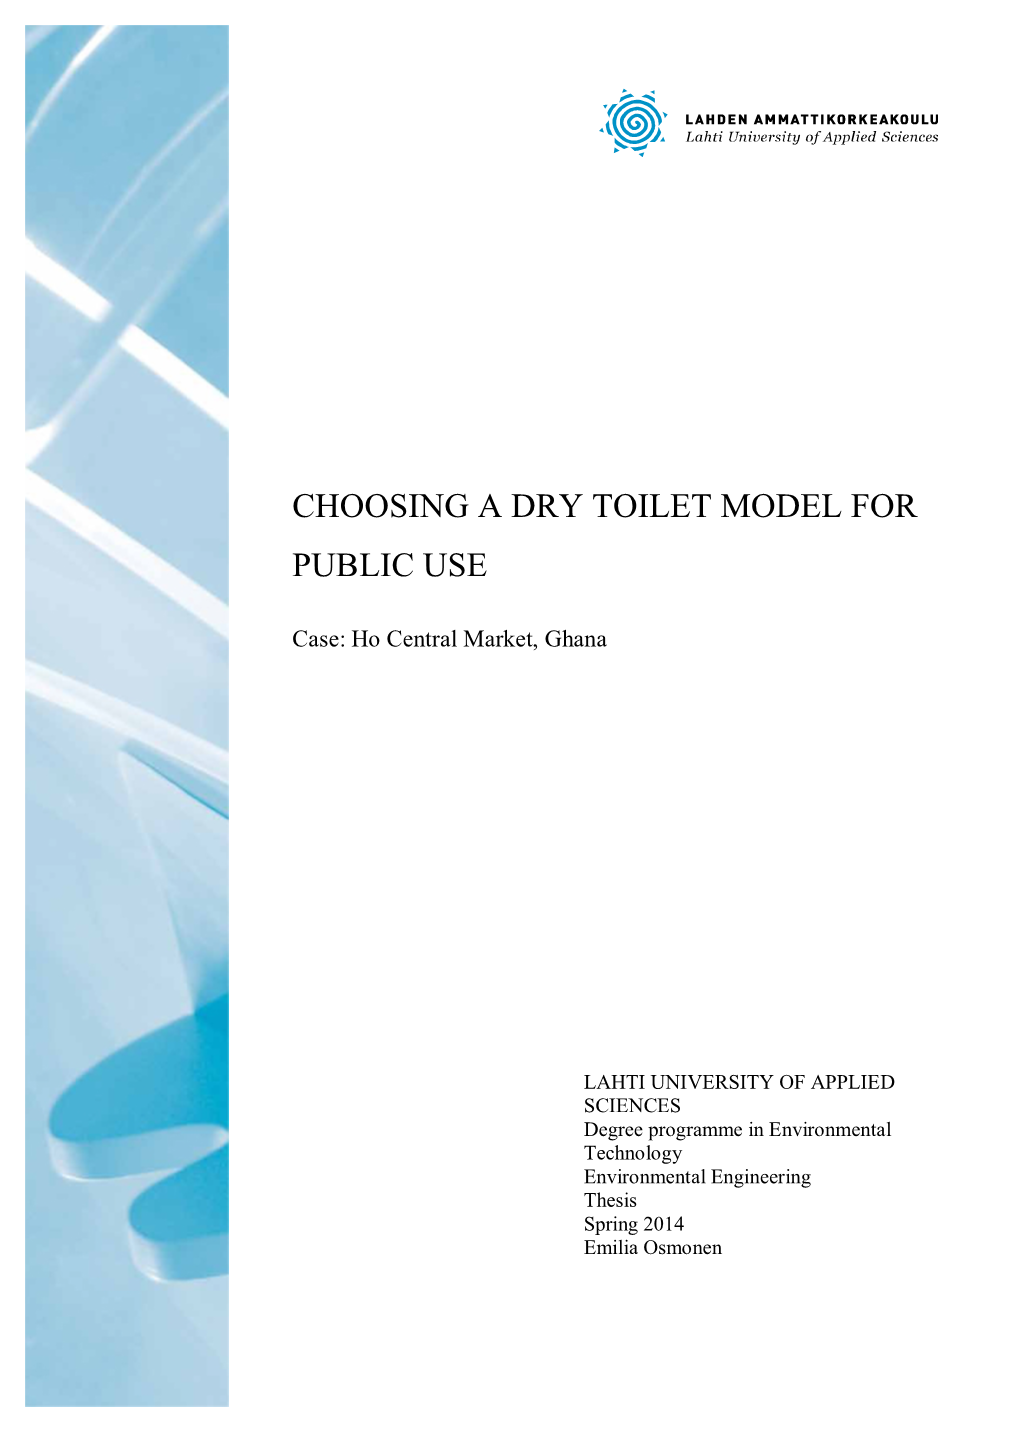 Choosing a Dry Toilet Model for Public Use